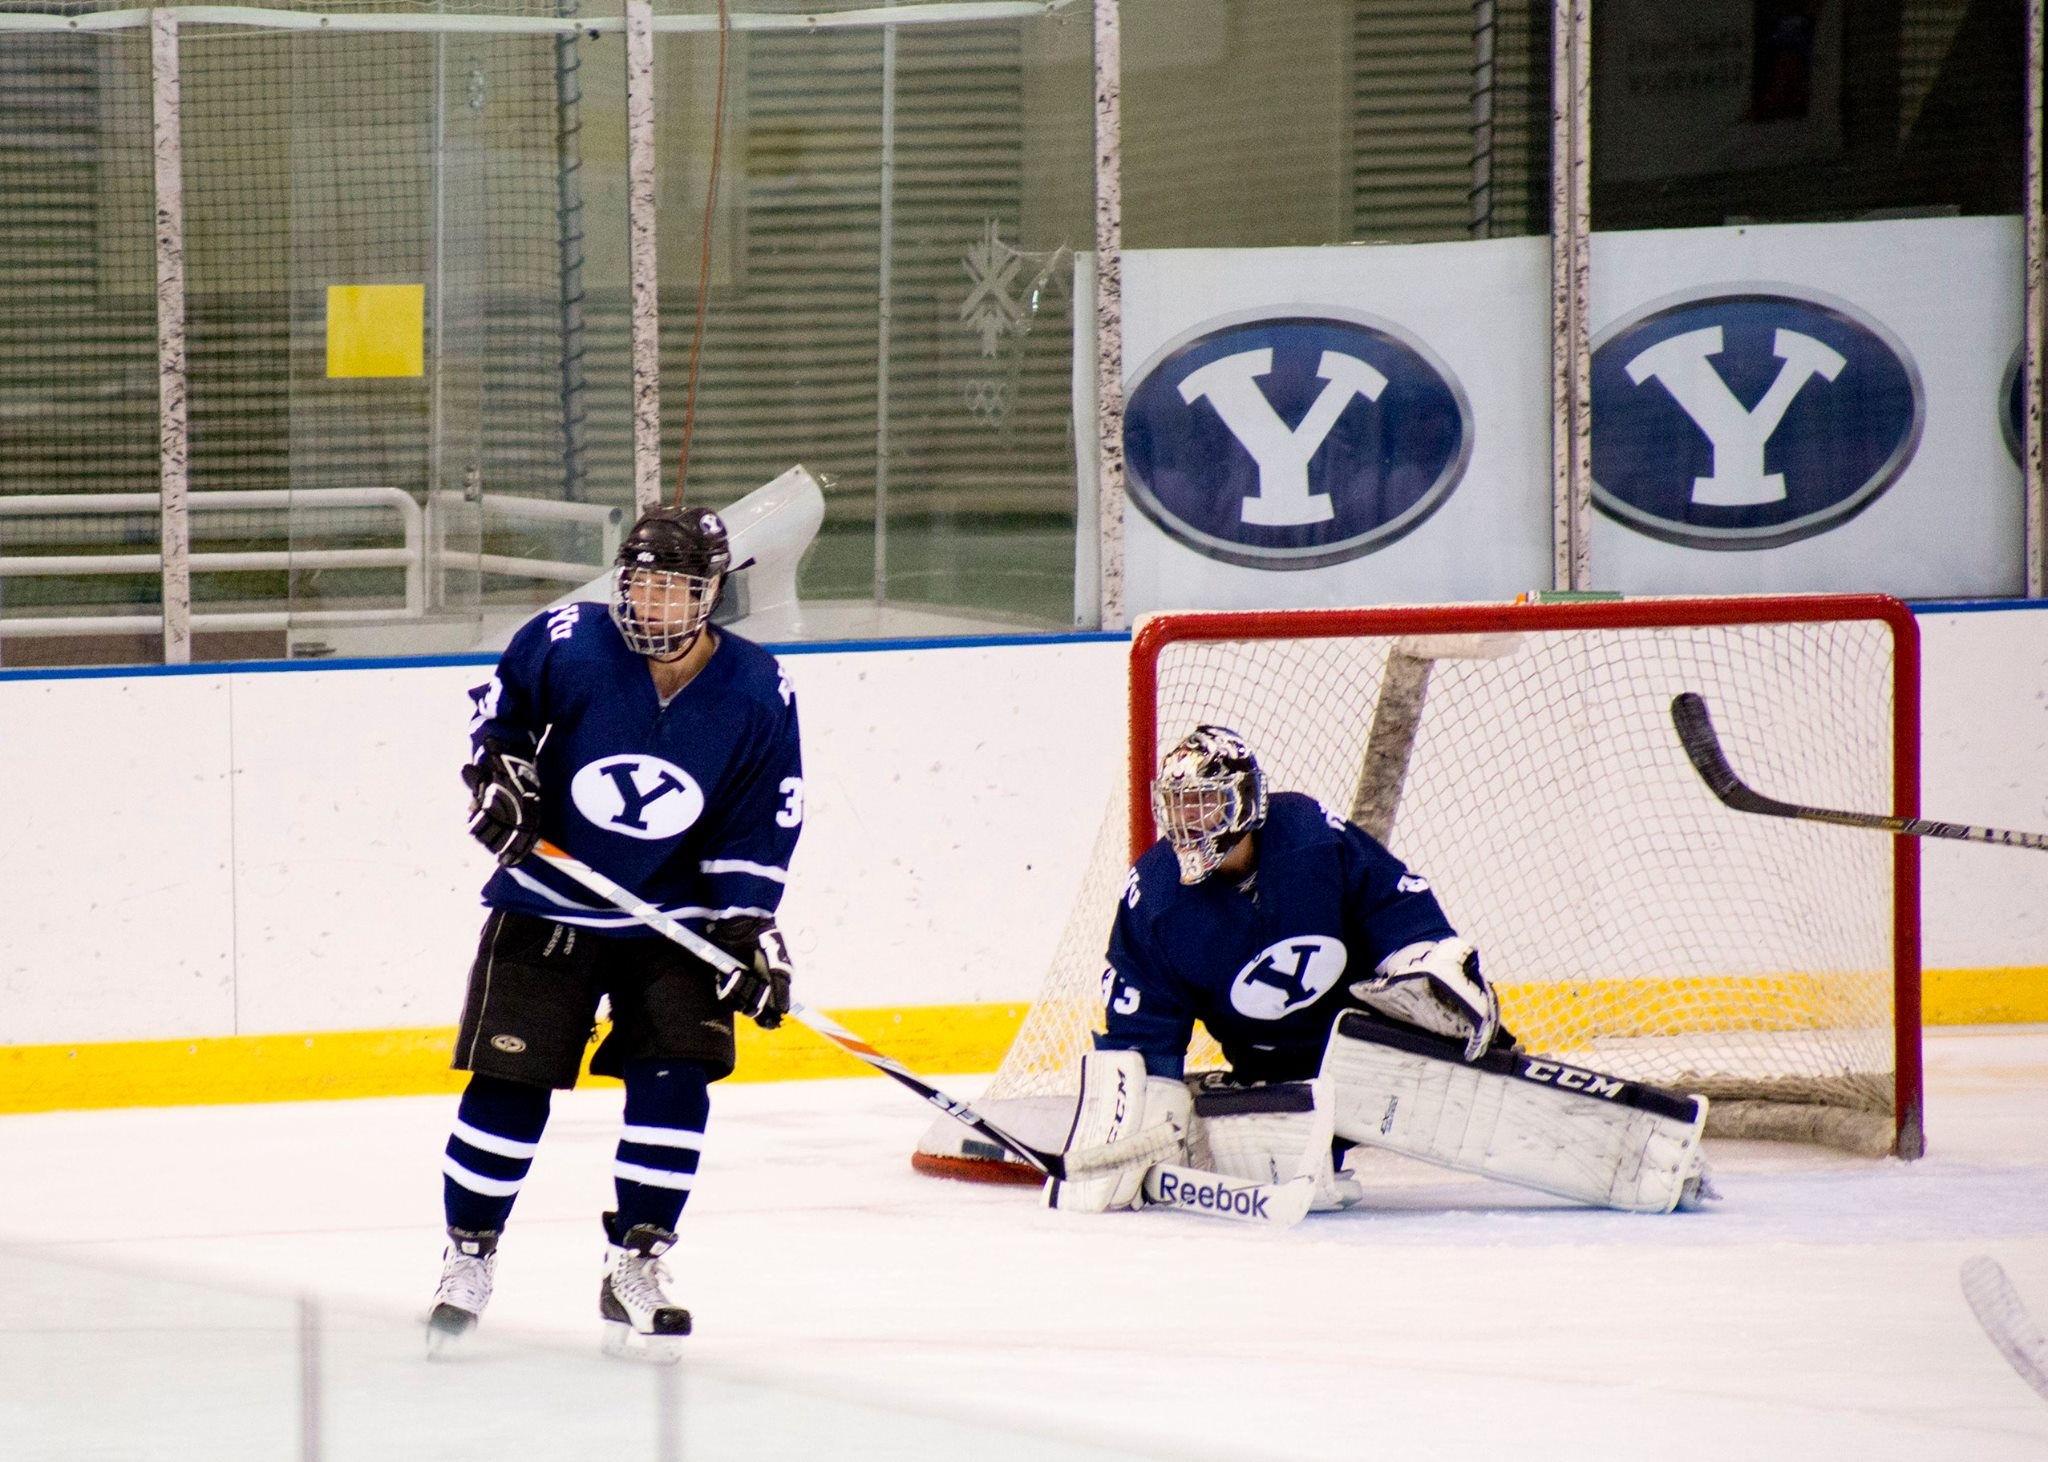 Bussell guards his net at home in the Provo Seven Peaks Ice Arena.